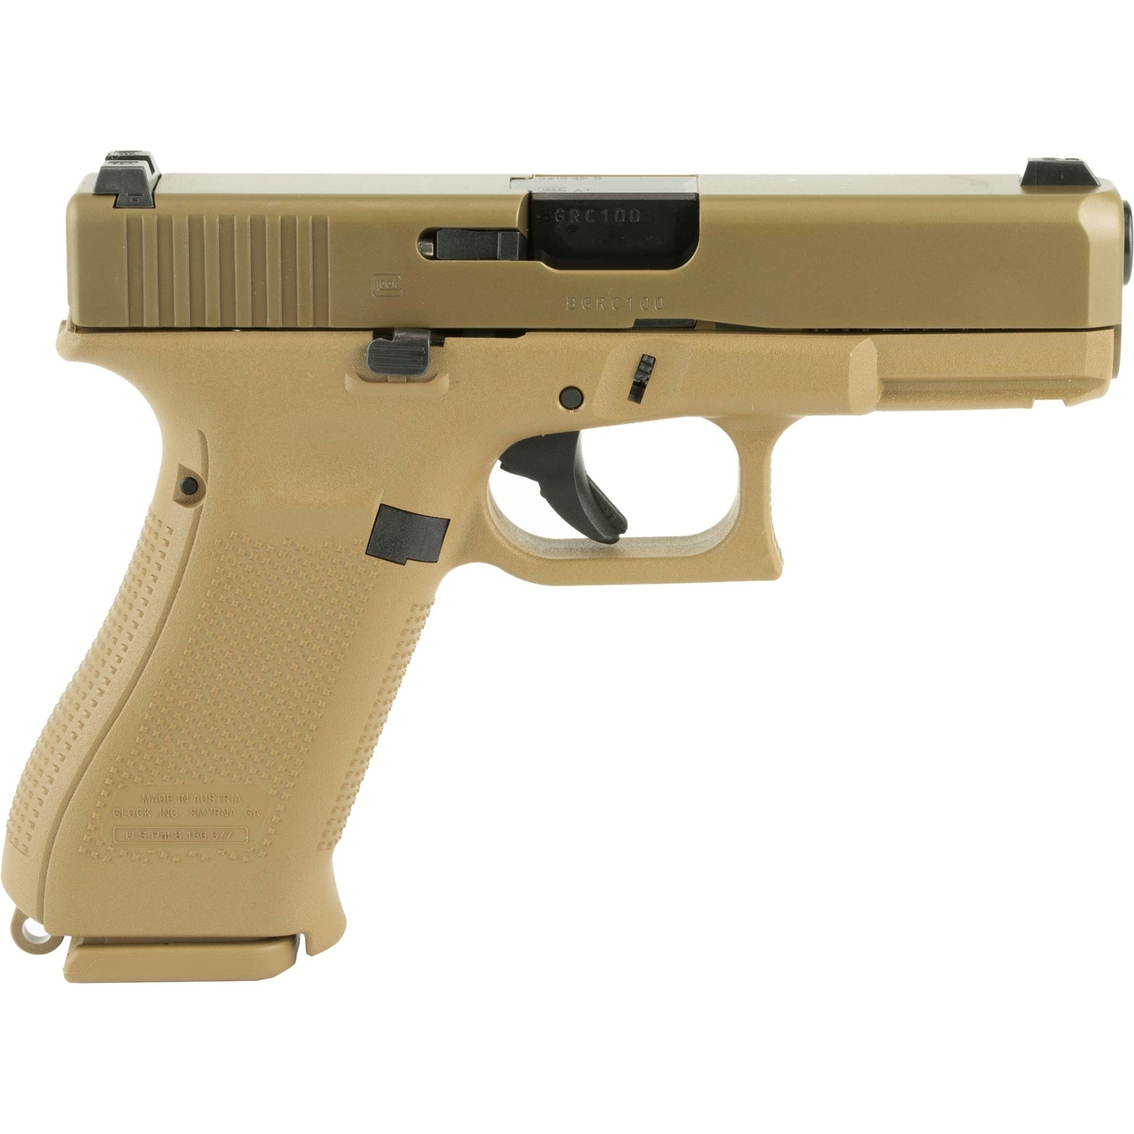 Glock 19x 9mm 4 02 In Barrel 10 Rds 3 Mags Pistol Coyote Brown Handguns Sports Outdoors Shop The Exchange